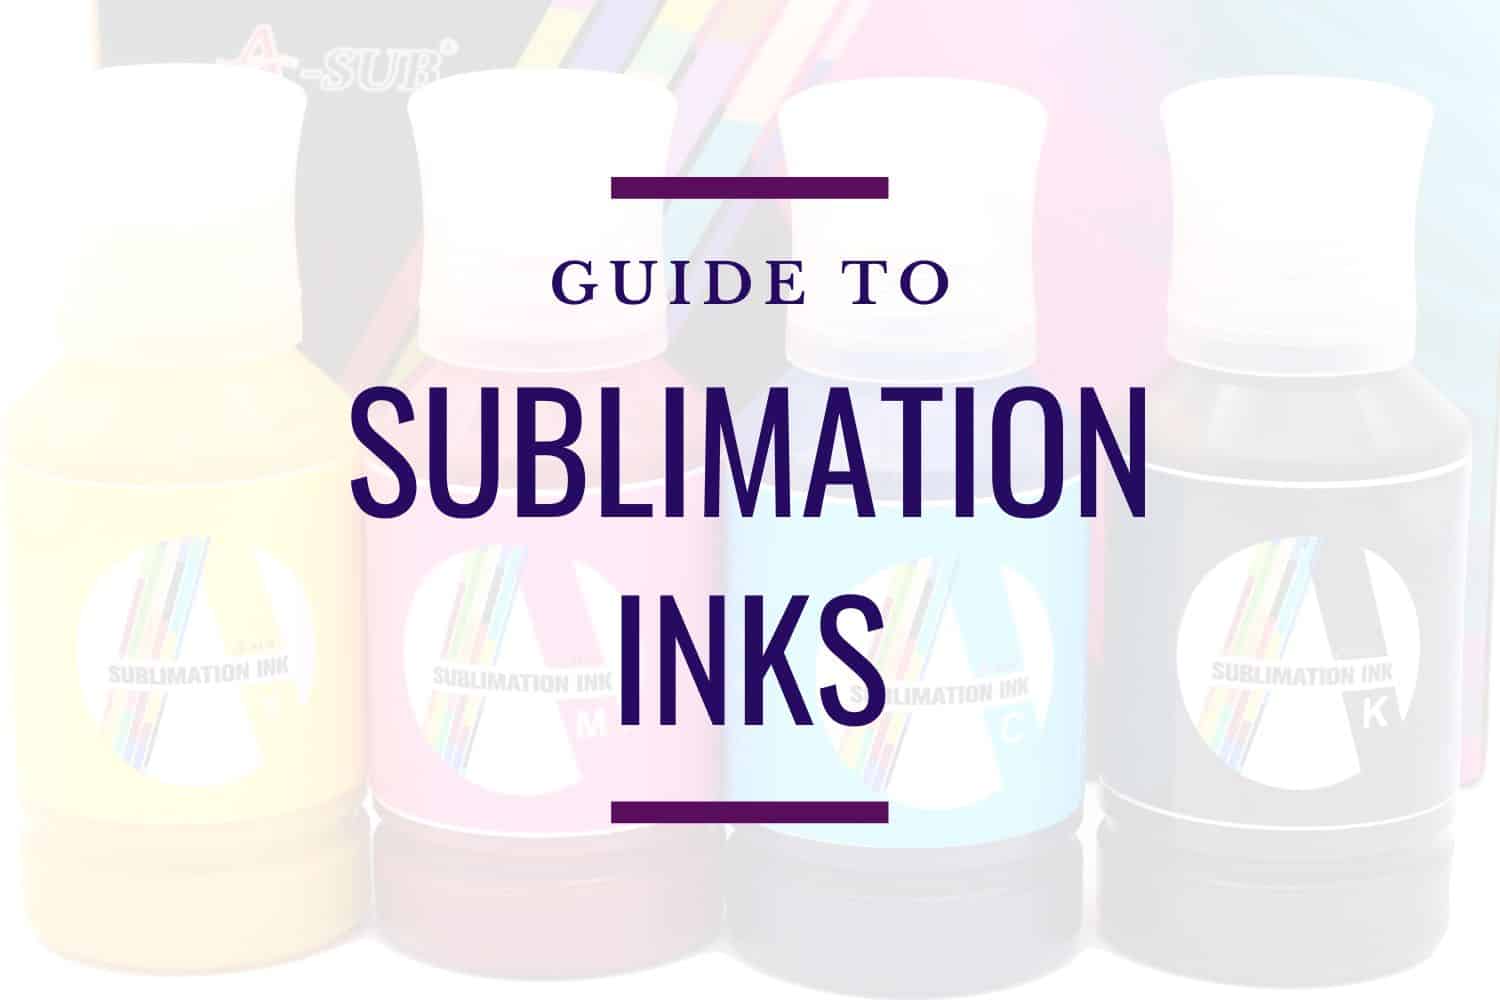 Which sublimation ink should I buy? Which ink is the best? Let's compare! 